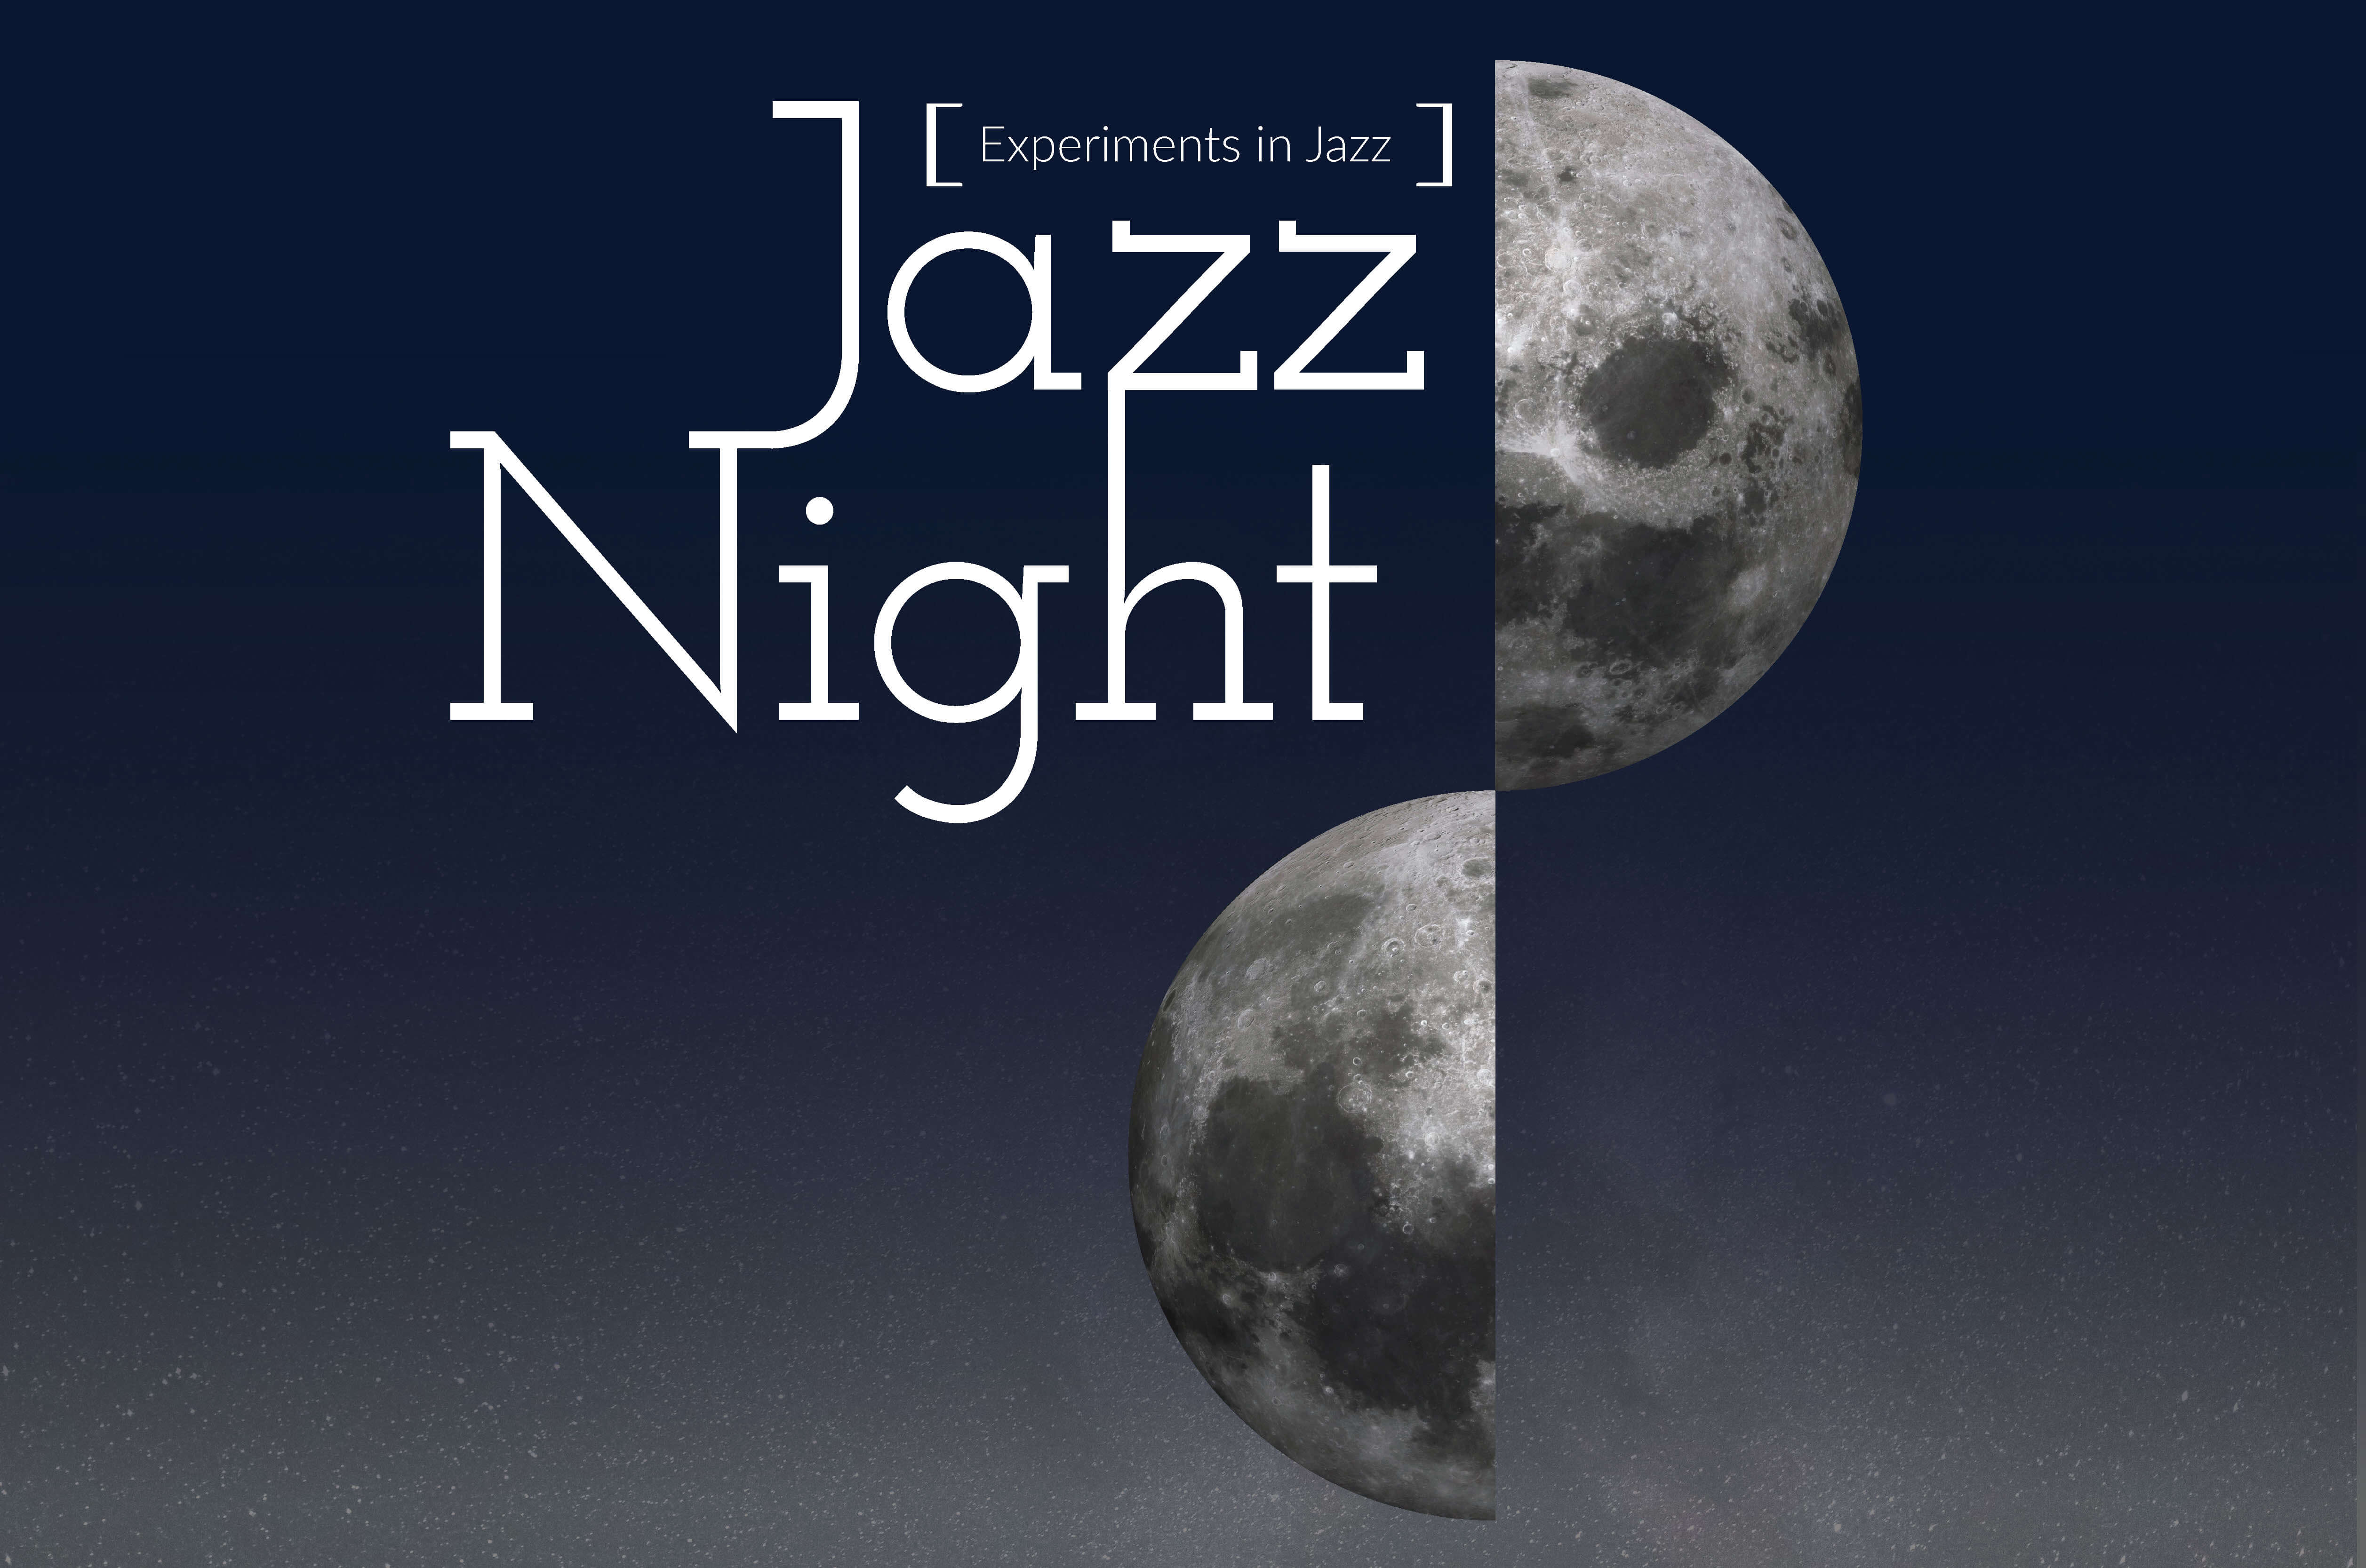 Image of moon with the words "Jazz Night."